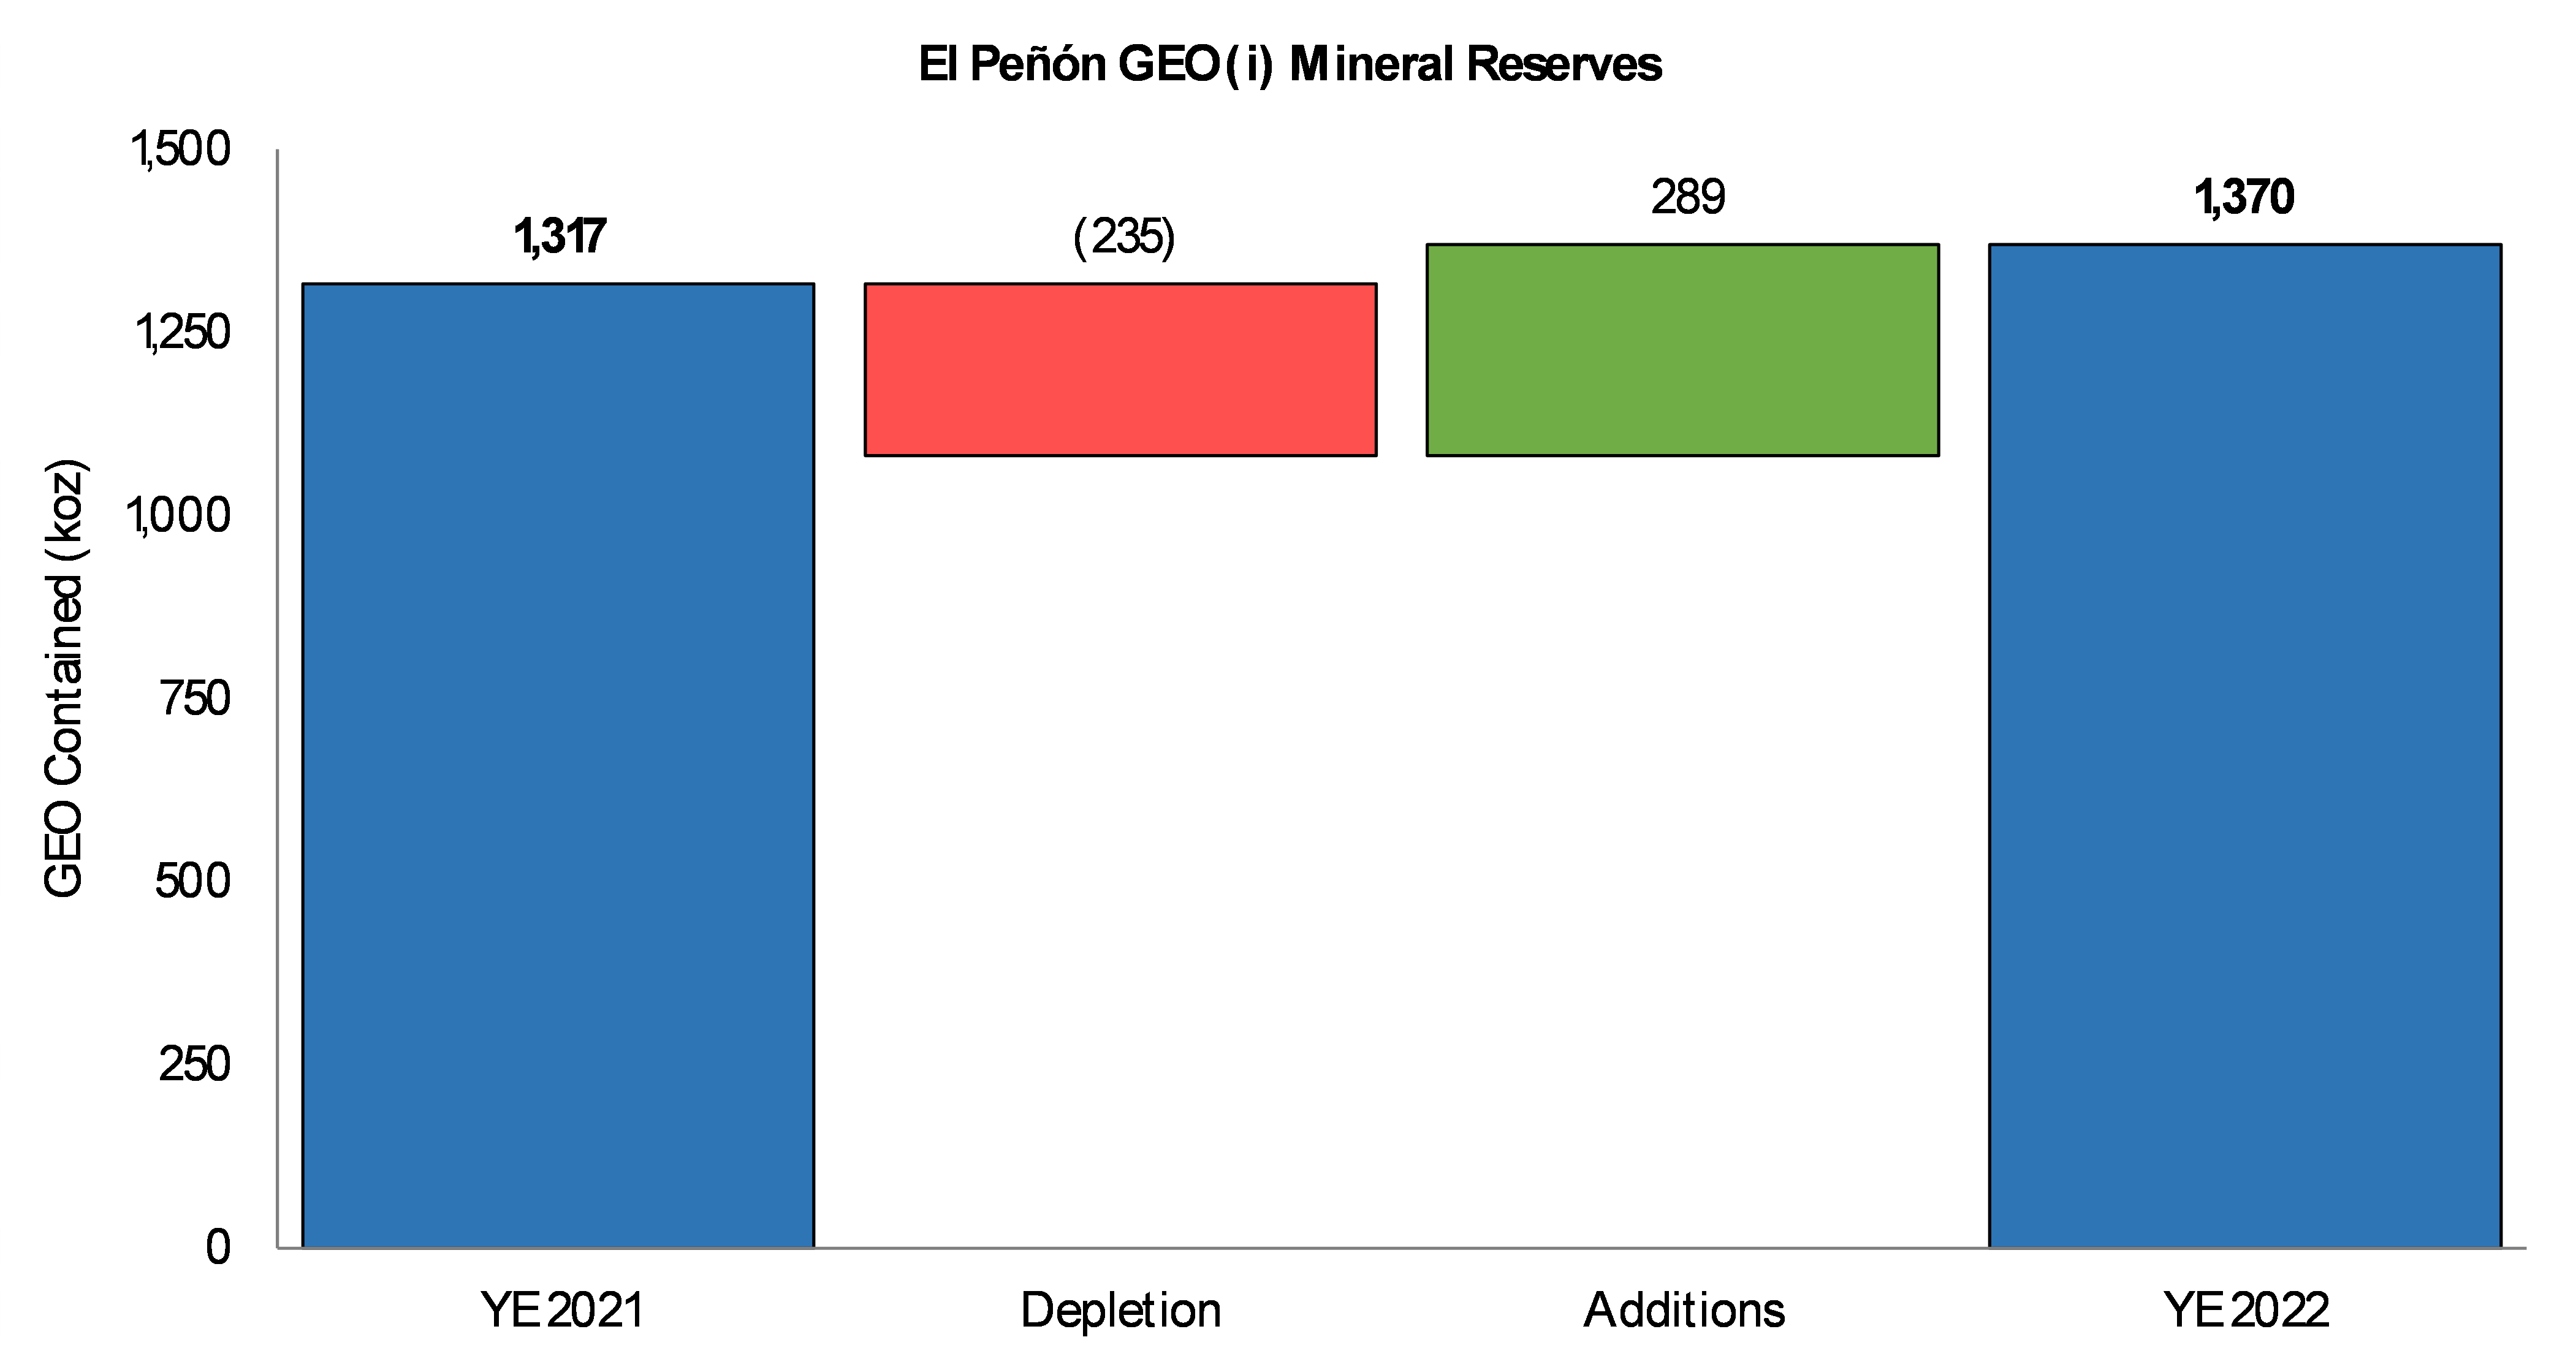 Change in Proven and Probable Mineral Reserves at El Peñón